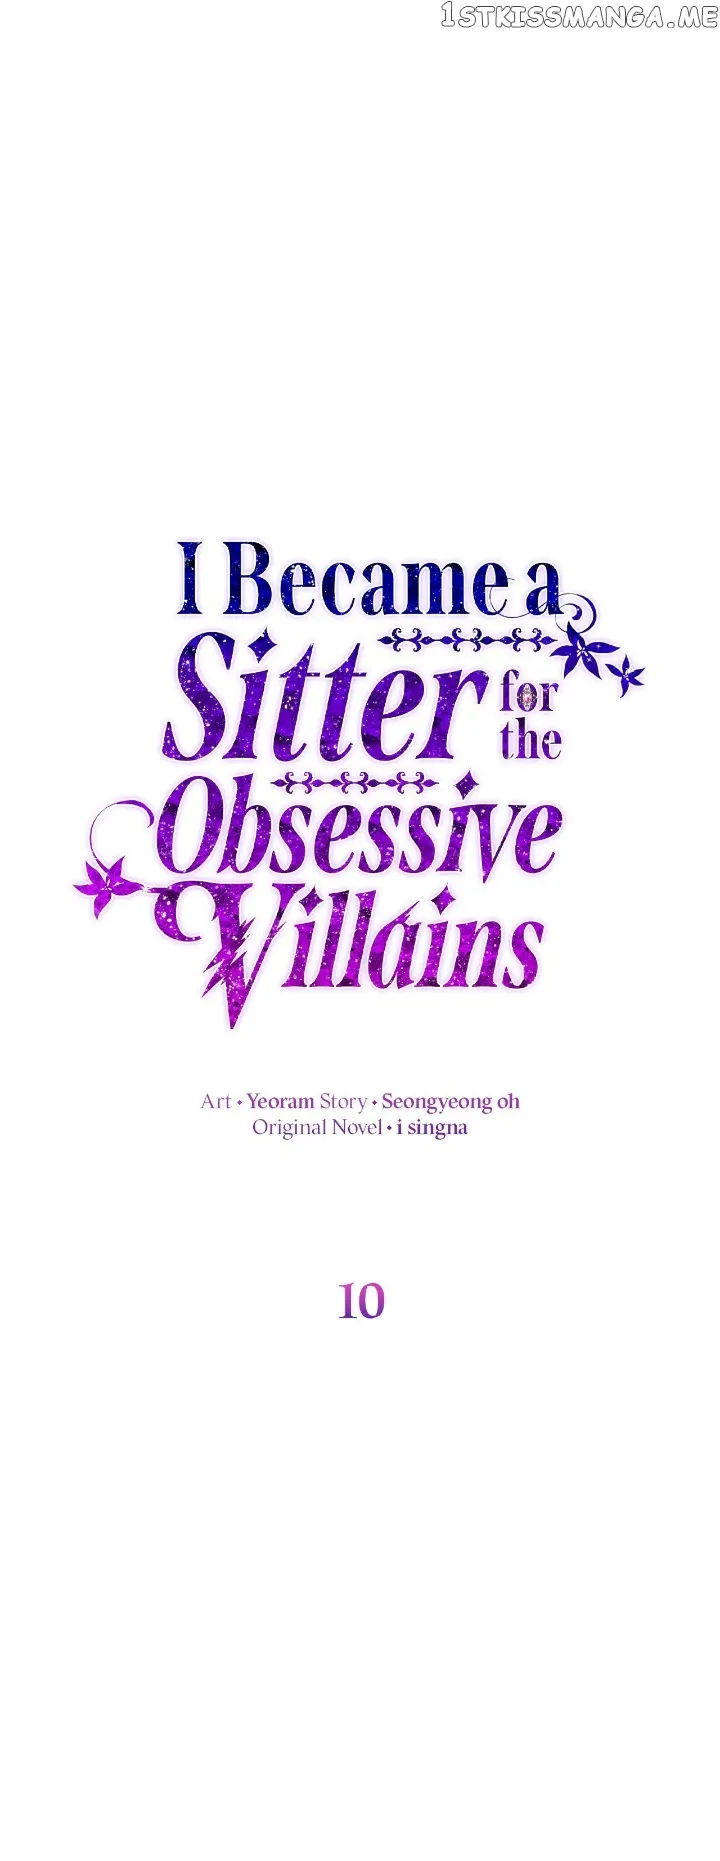 I Became a Sitter for the Obsessive Villains chapter 10